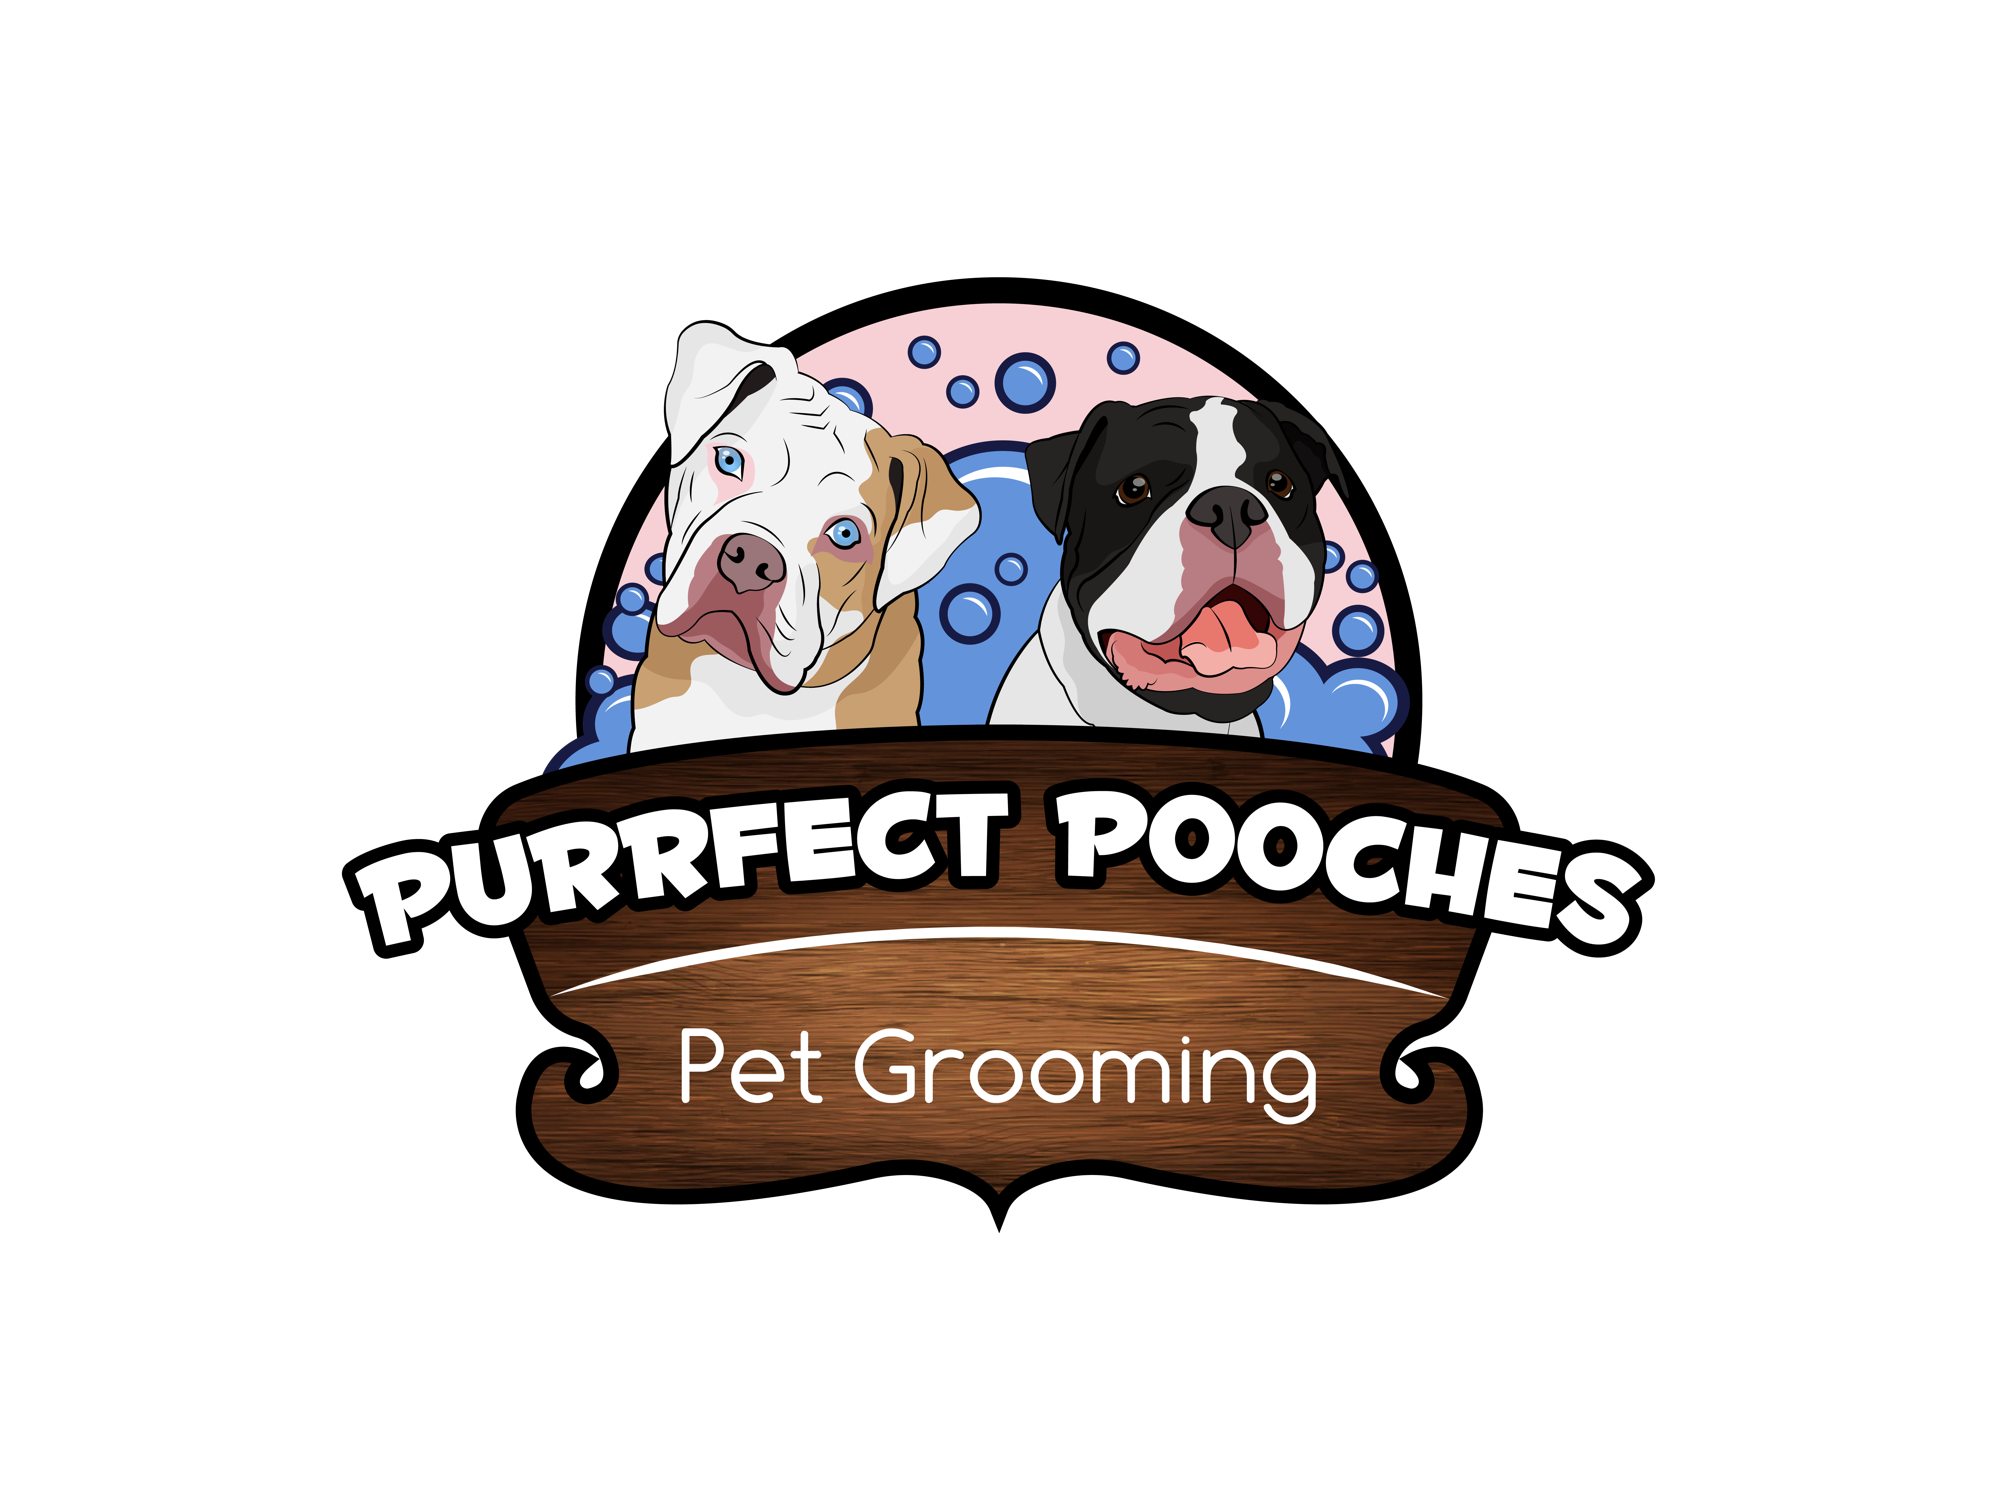 Purrfect Pooches Pet Grooming